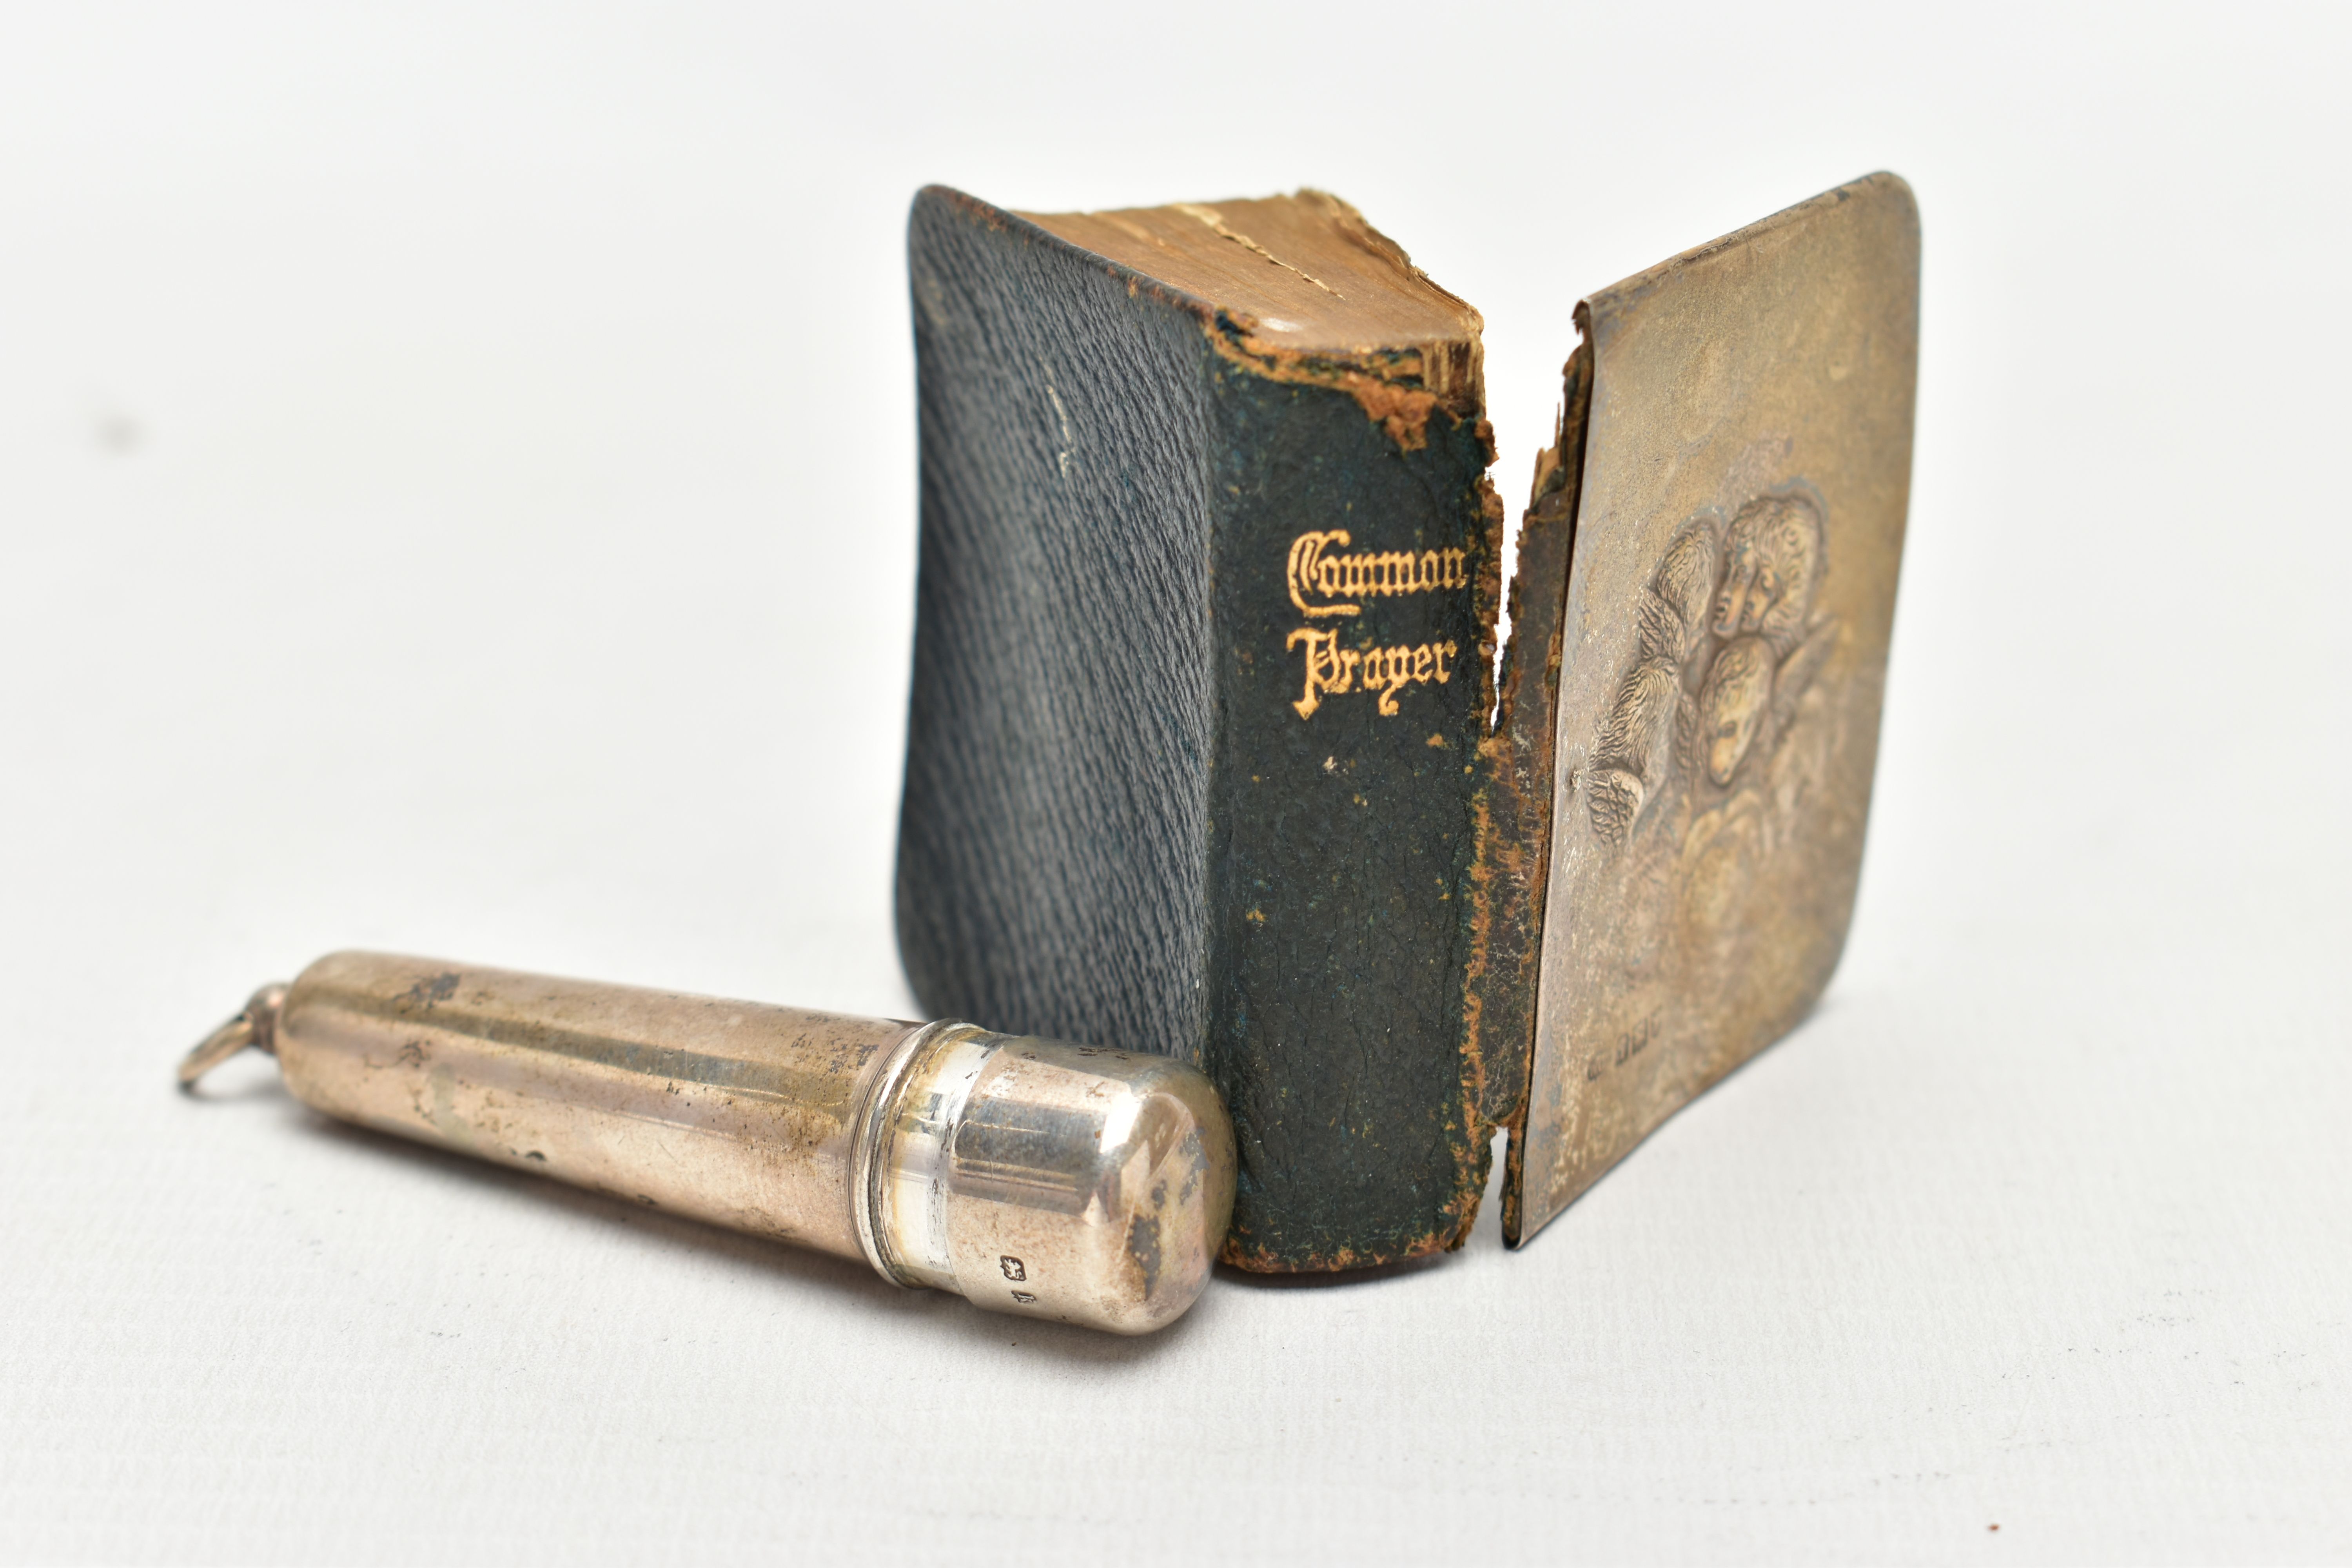 A SILVER PRAYER BOOK AND CIGAR HOLDER, the book with silver front panel depicting five Cherubs, - Image 2 of 4